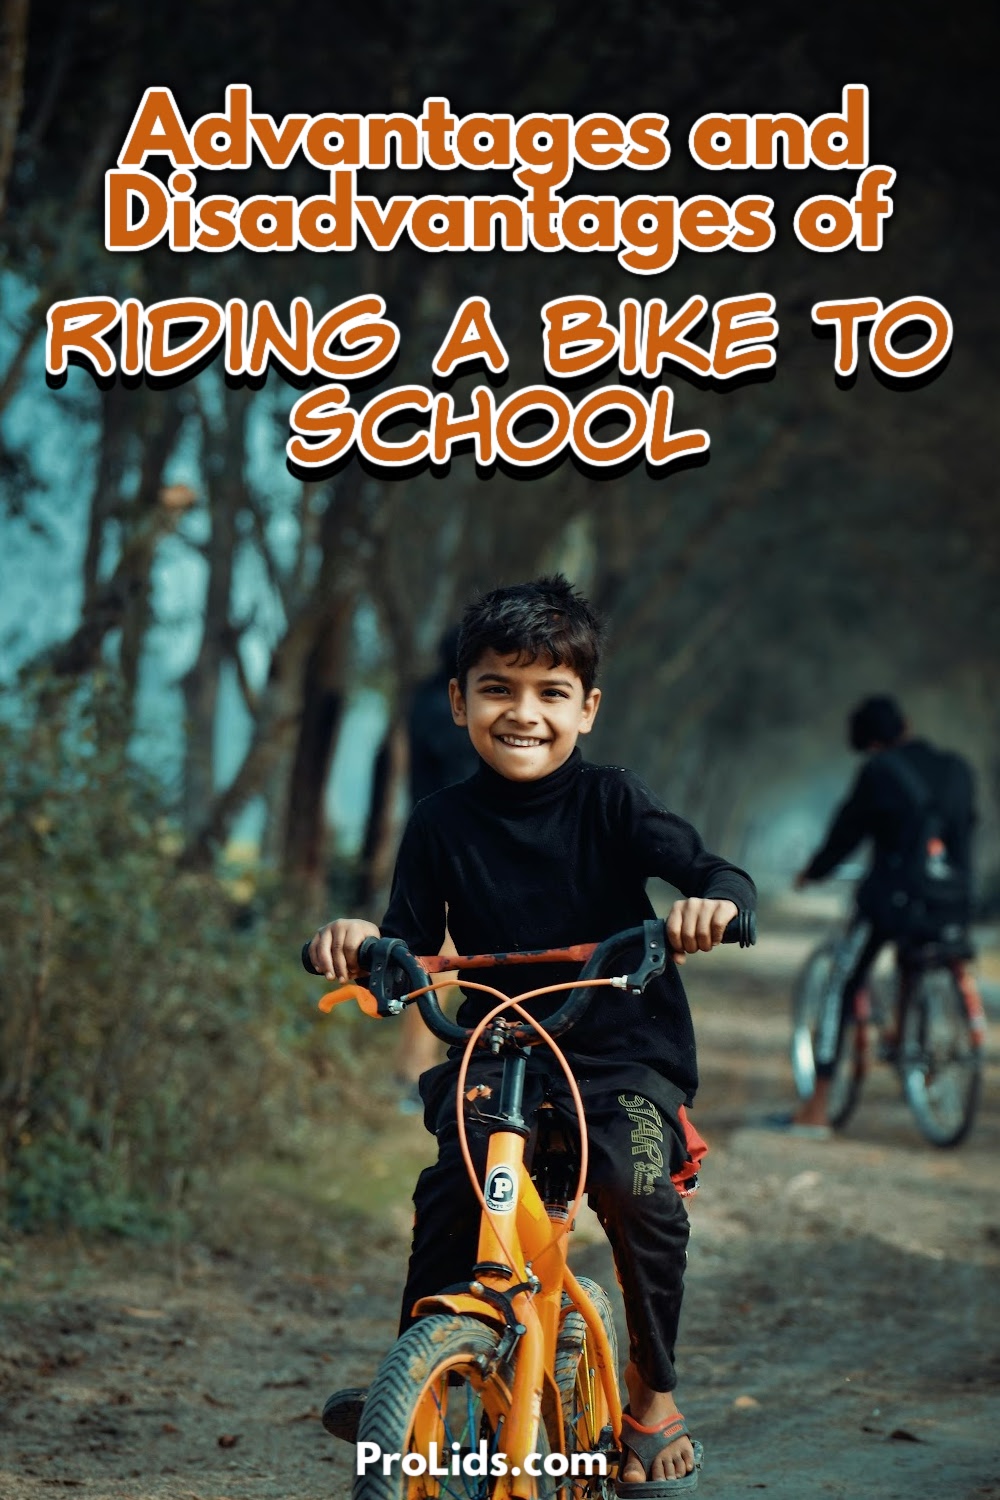 Riding a bike to school advantages and disadvantages, and helps parents weigh the options for their kids and their own mornings.